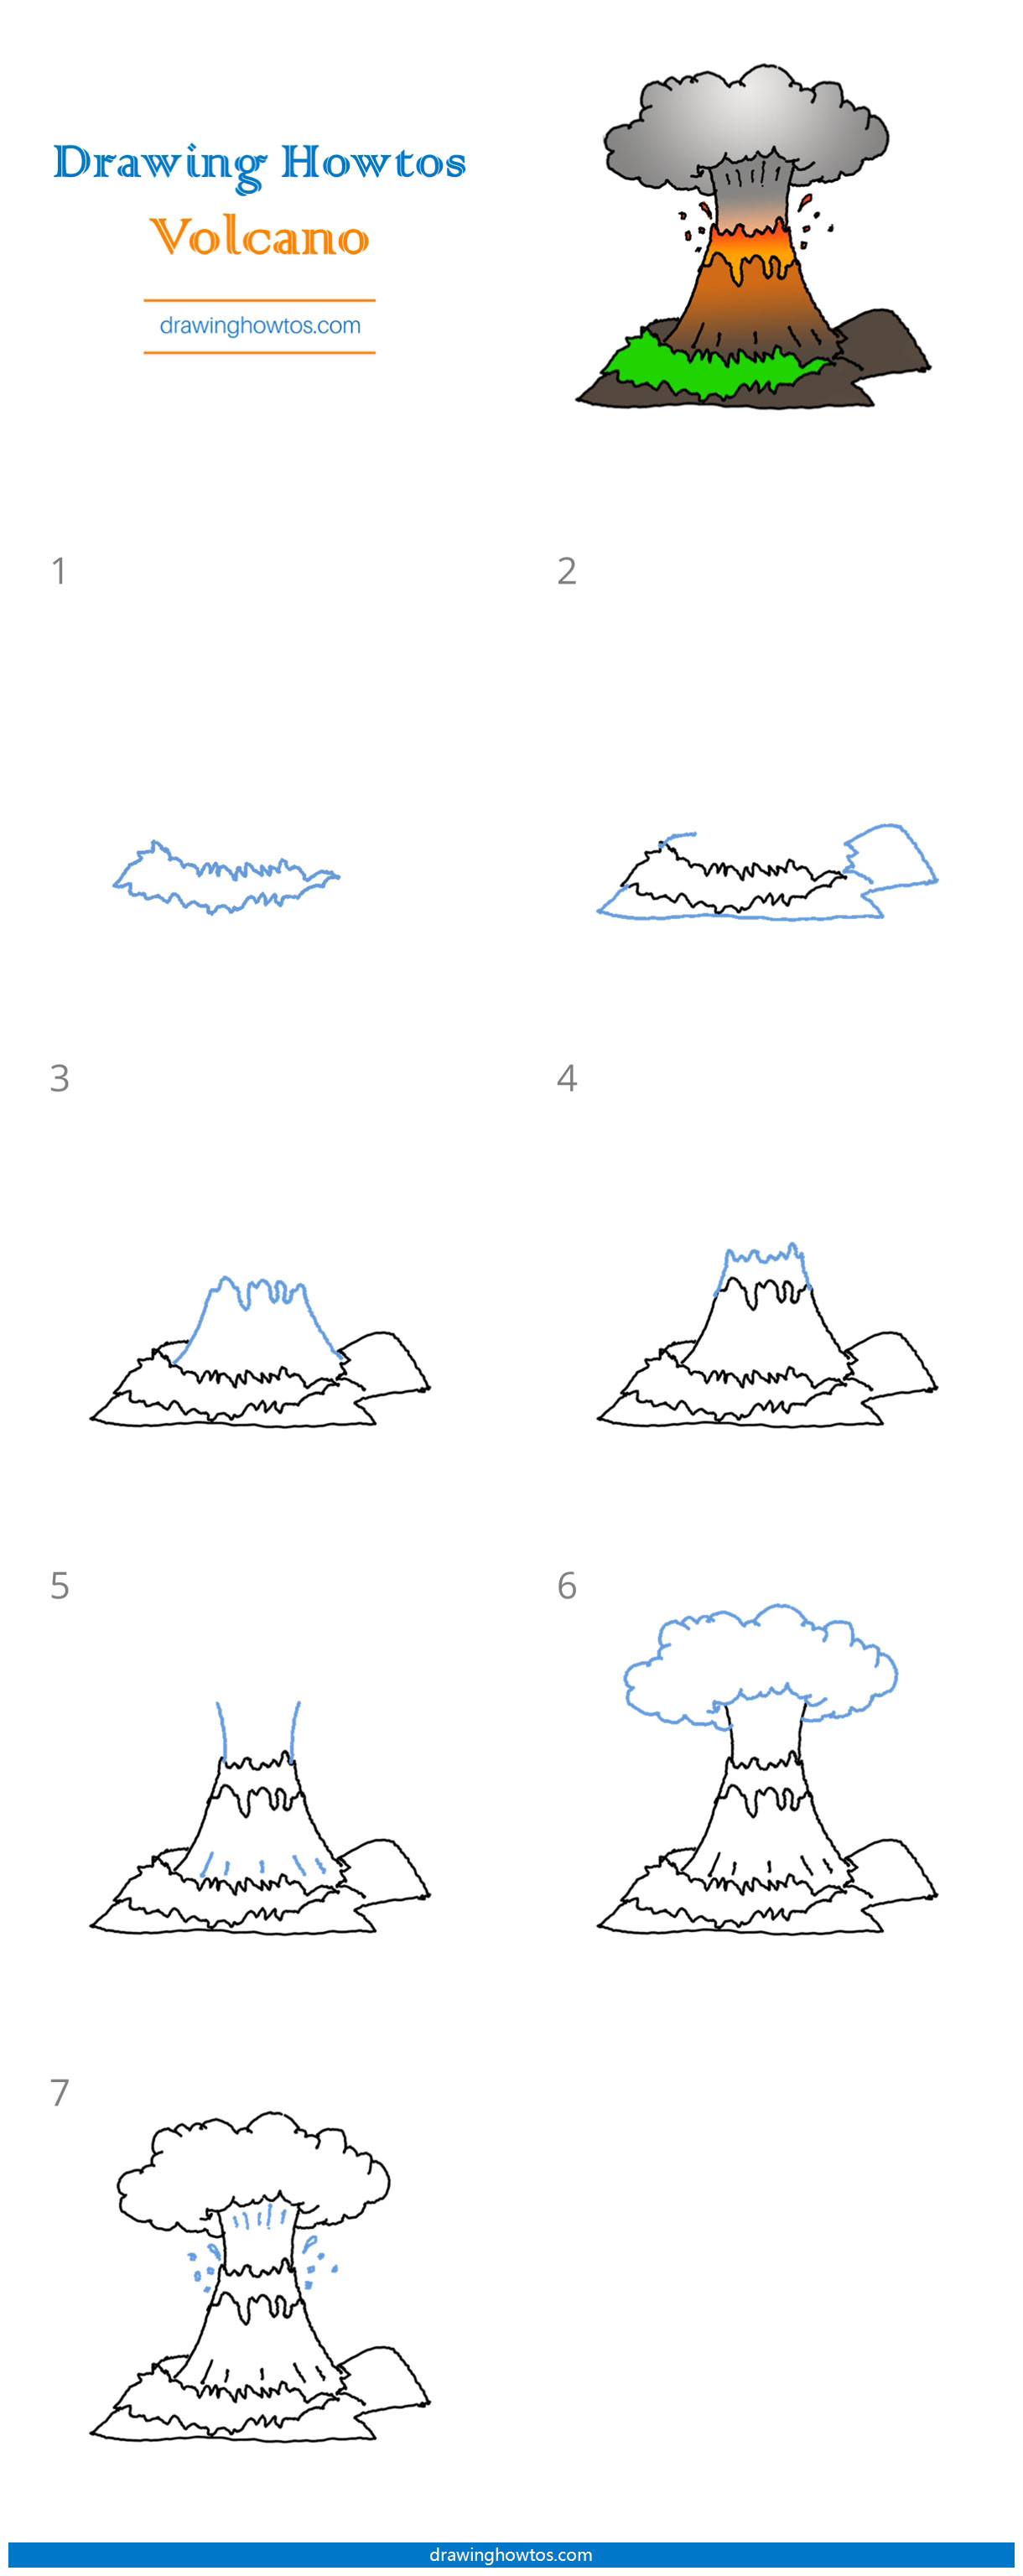 How to Draw a Volcano Step by Step